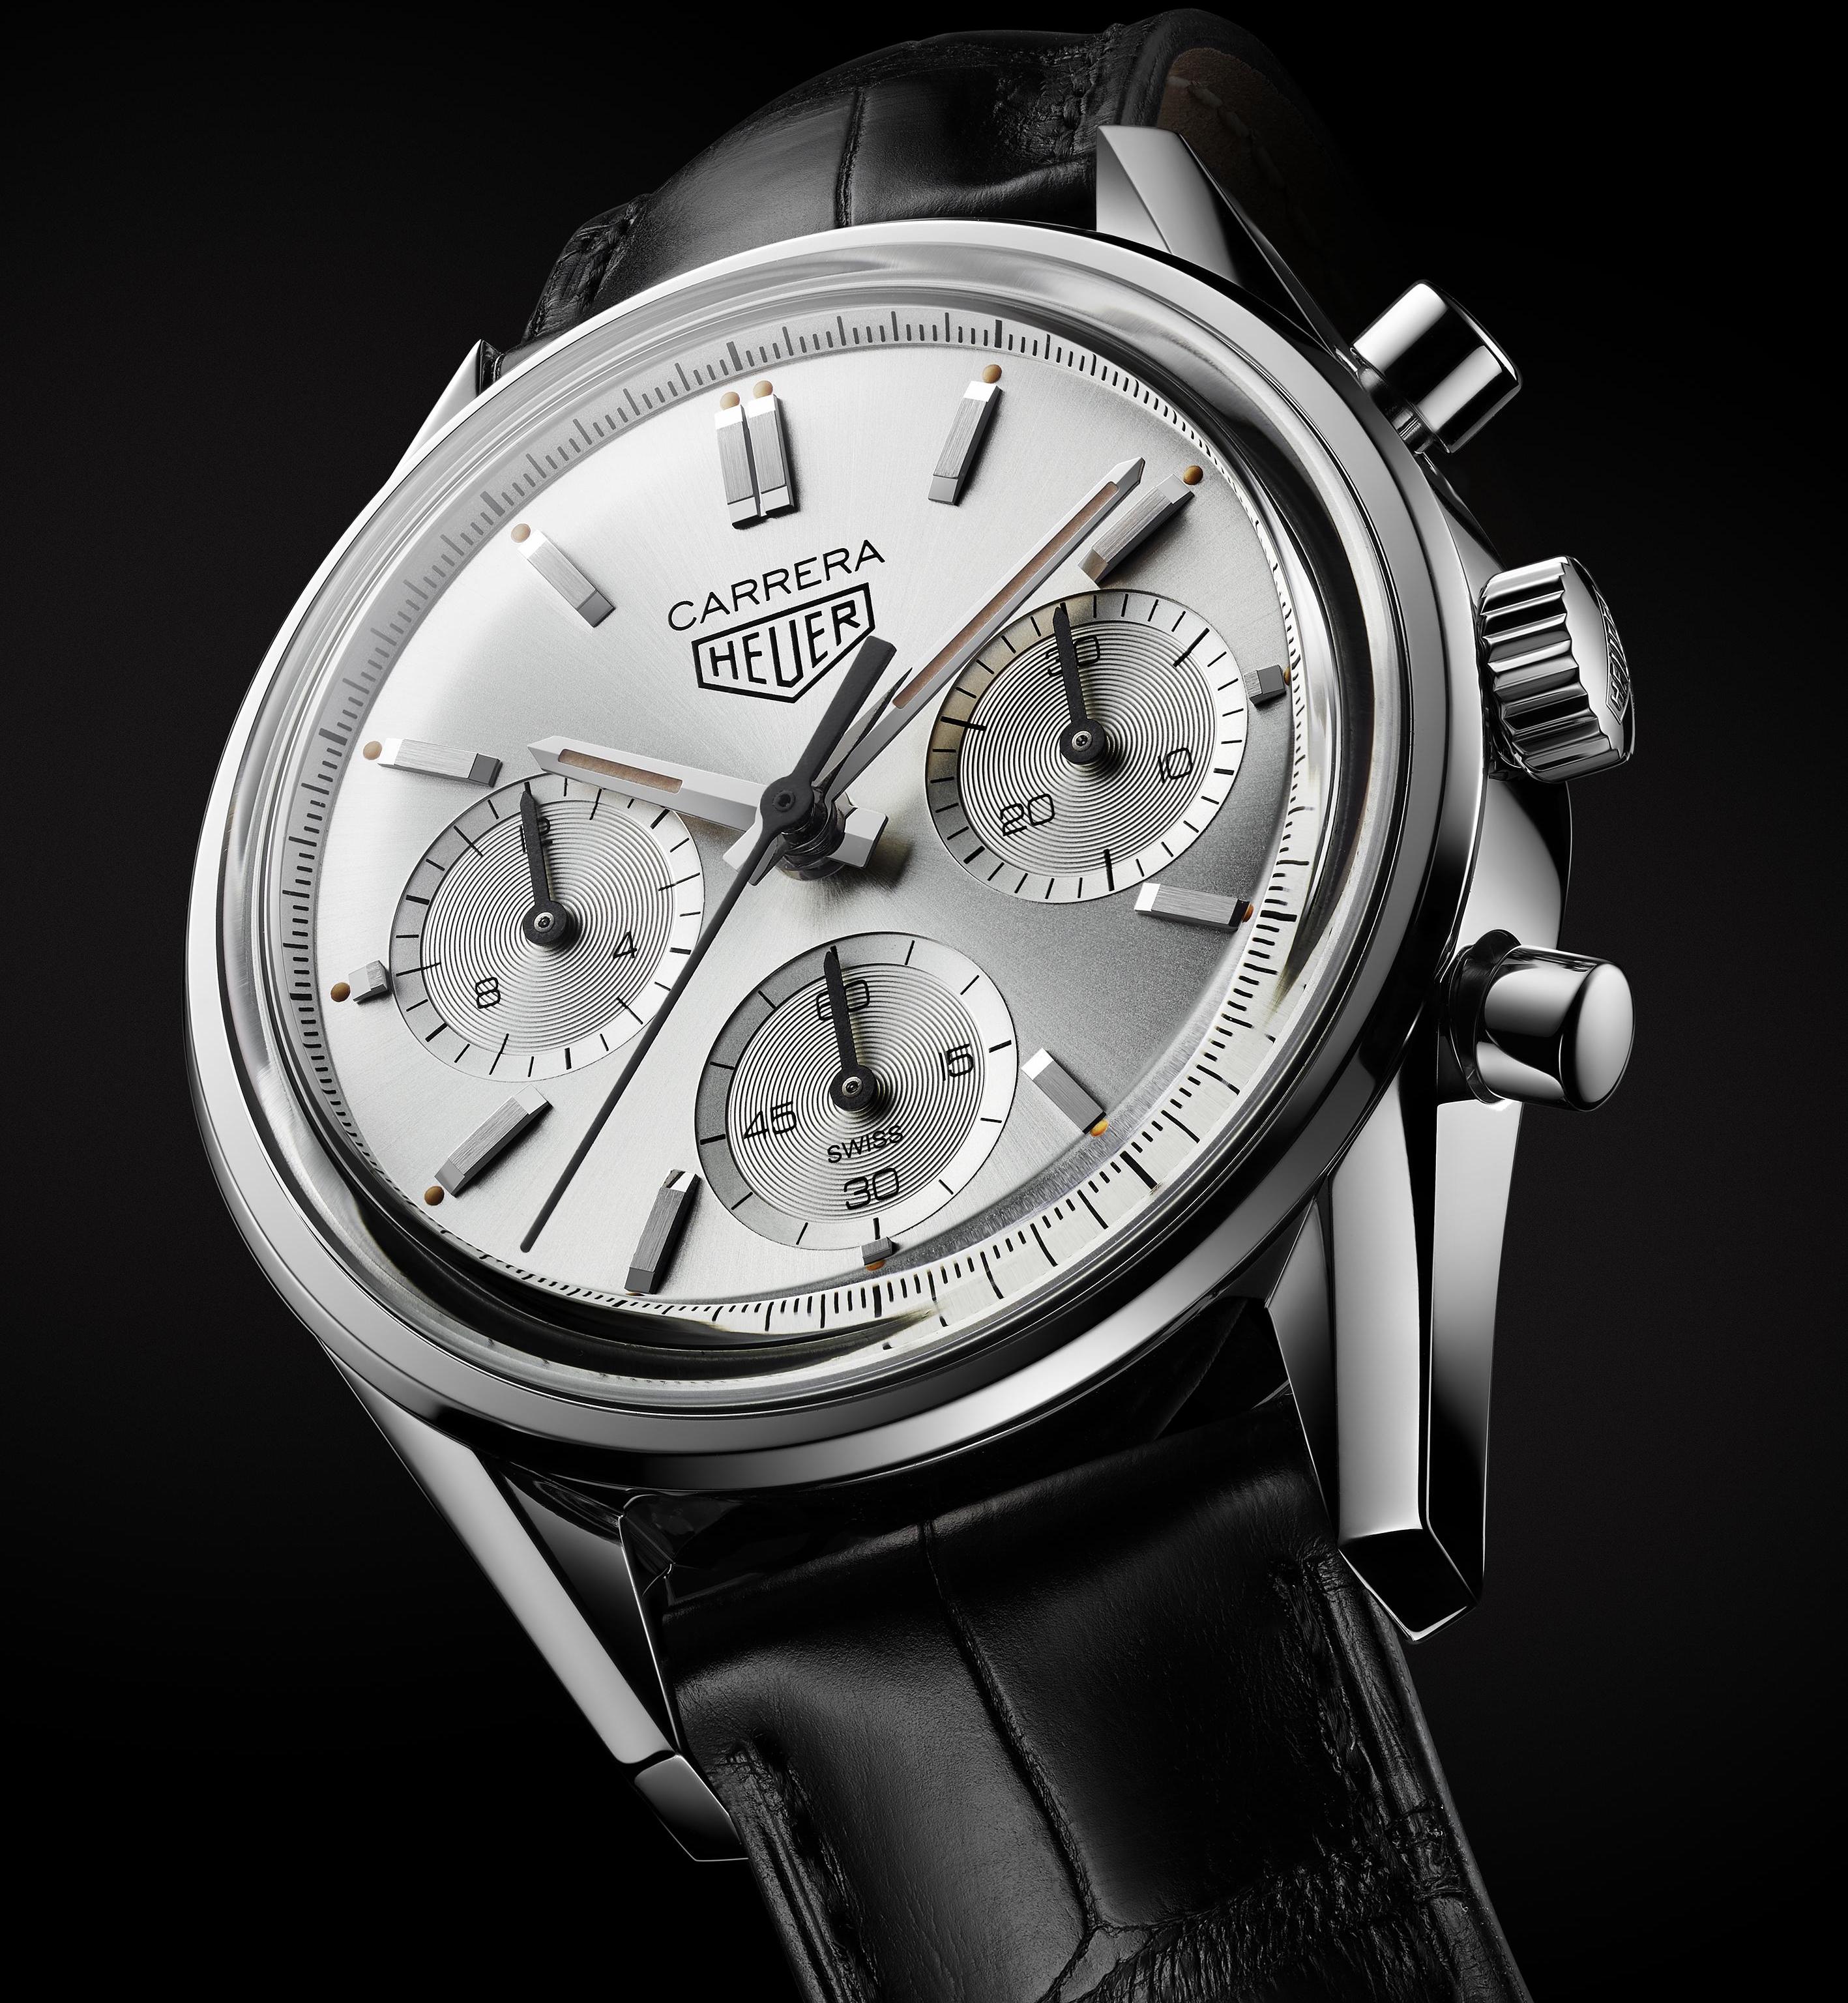 160 Years Young: Re-edition of a Heuer Carrera